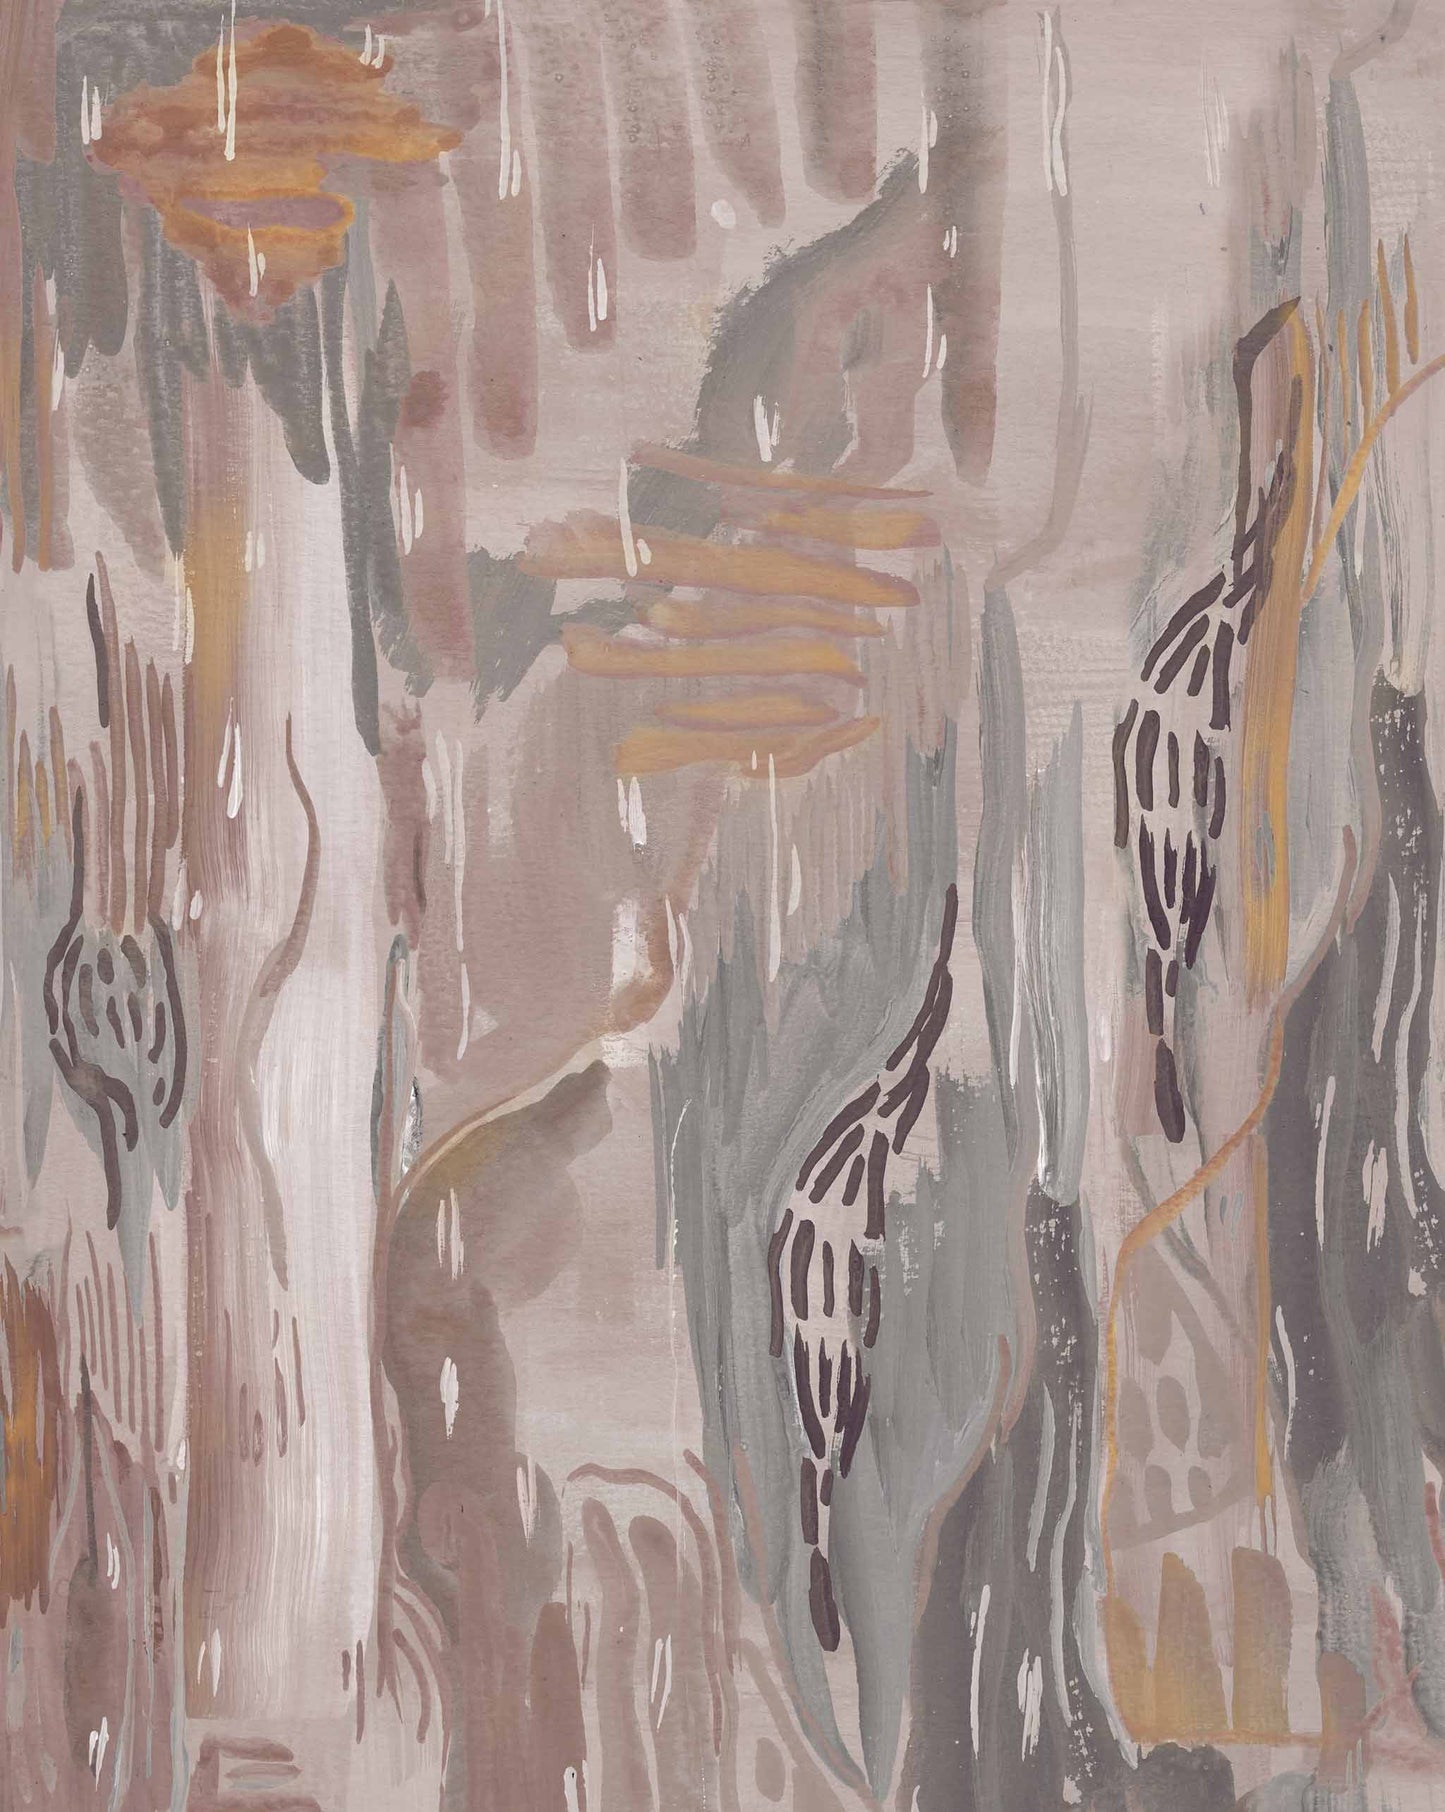 Abstract painting with earthy tones and a hint of Majorelle Wallpaper Mural, featuring fluid streaks and organic shapes resembling leaves and brush strokes.